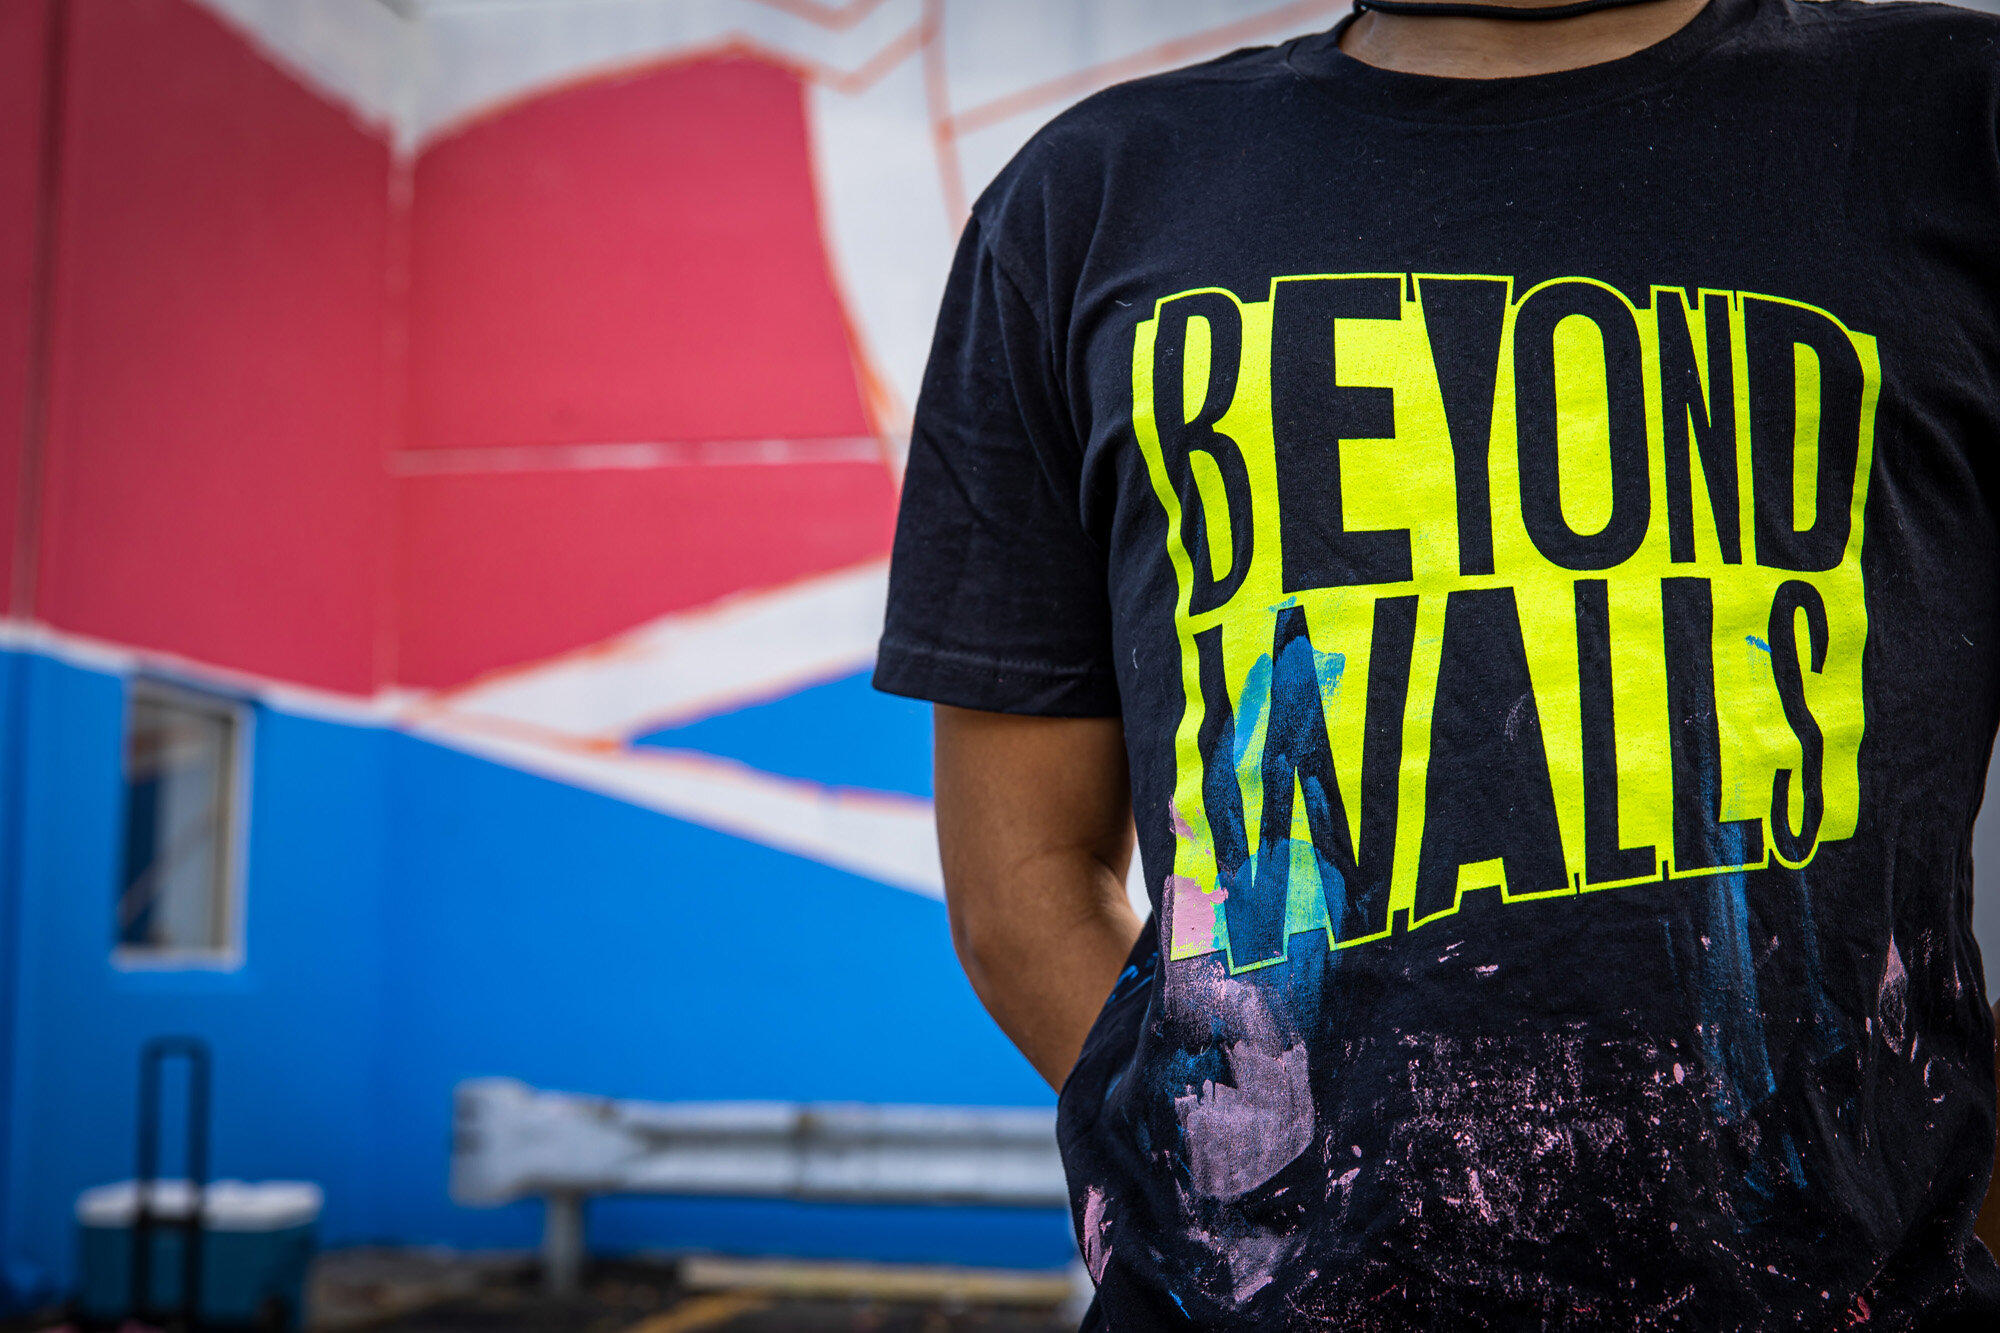  - Beyond Walls hasn’t created that sense of local pride in Lynn, it was always there. It’s just helped to showcase it to the world and local residents and former Lynn residents alike. Read more from Jonathan Berk’s testimonial here